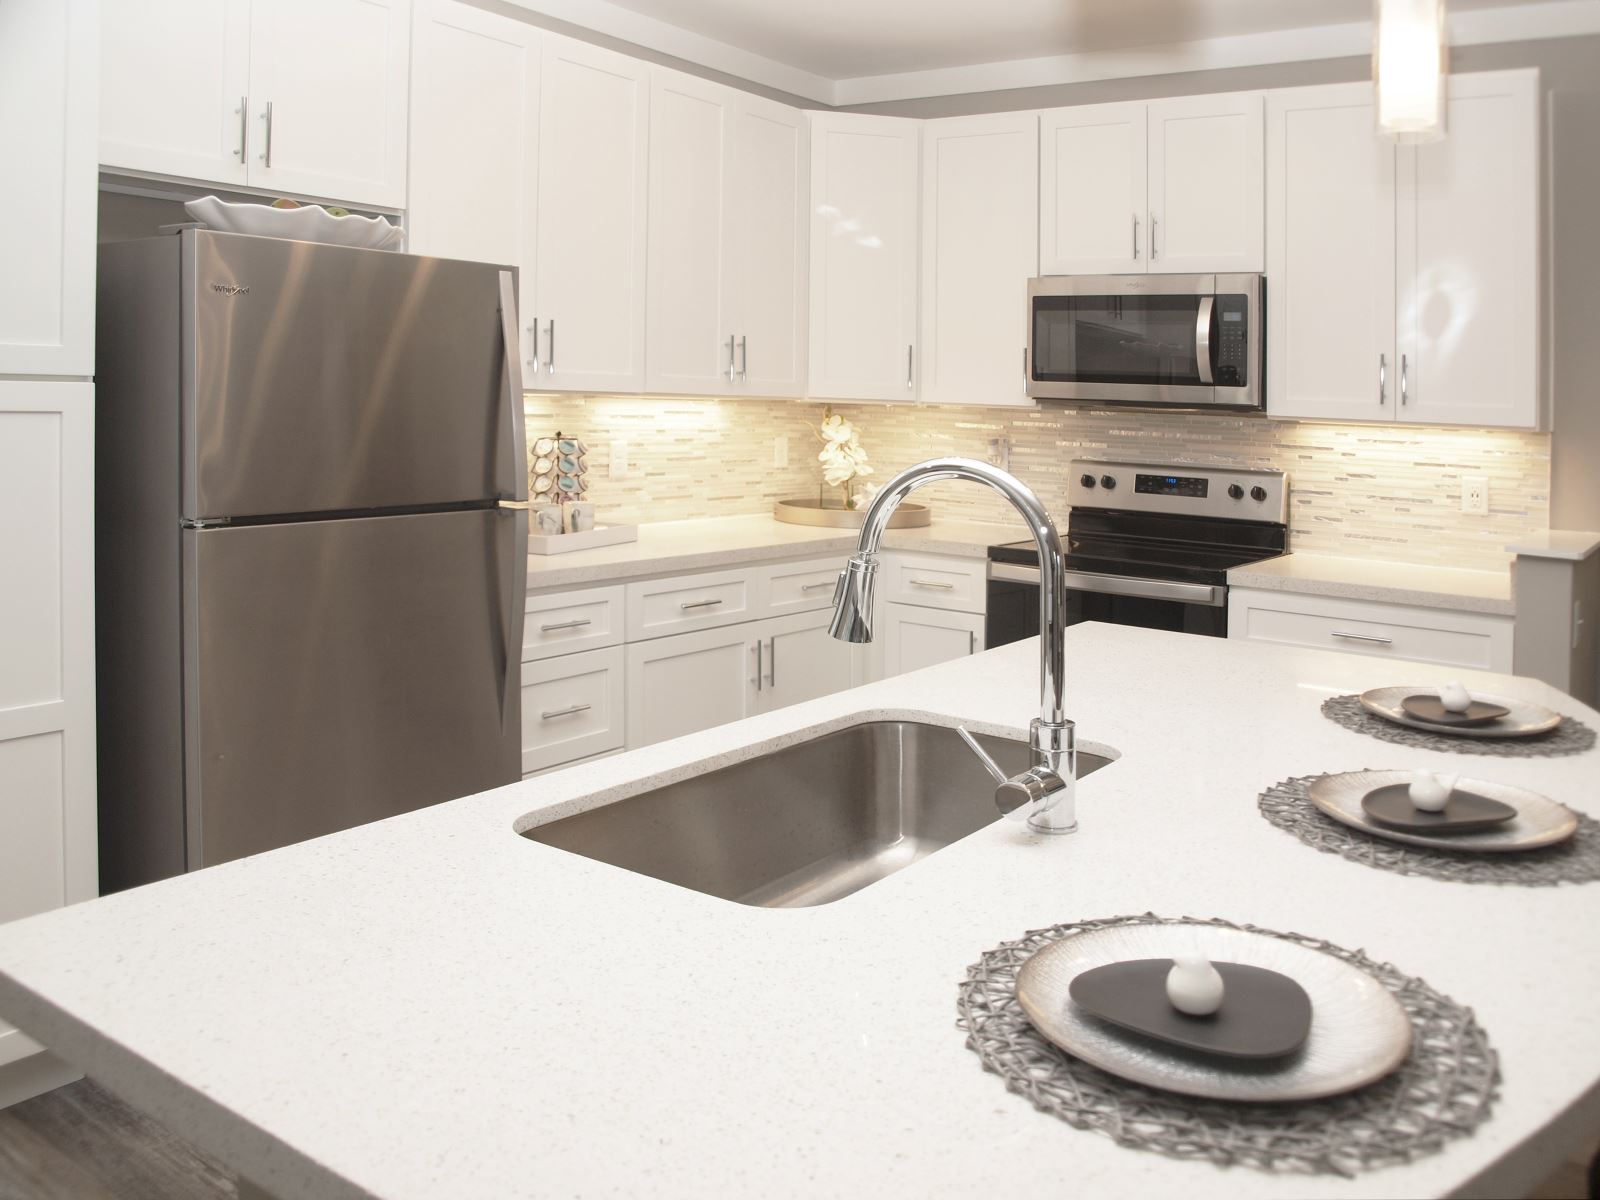 A view of an Element Oakwood apartment home's kitchen layout, cabinetry, and modern amenities.